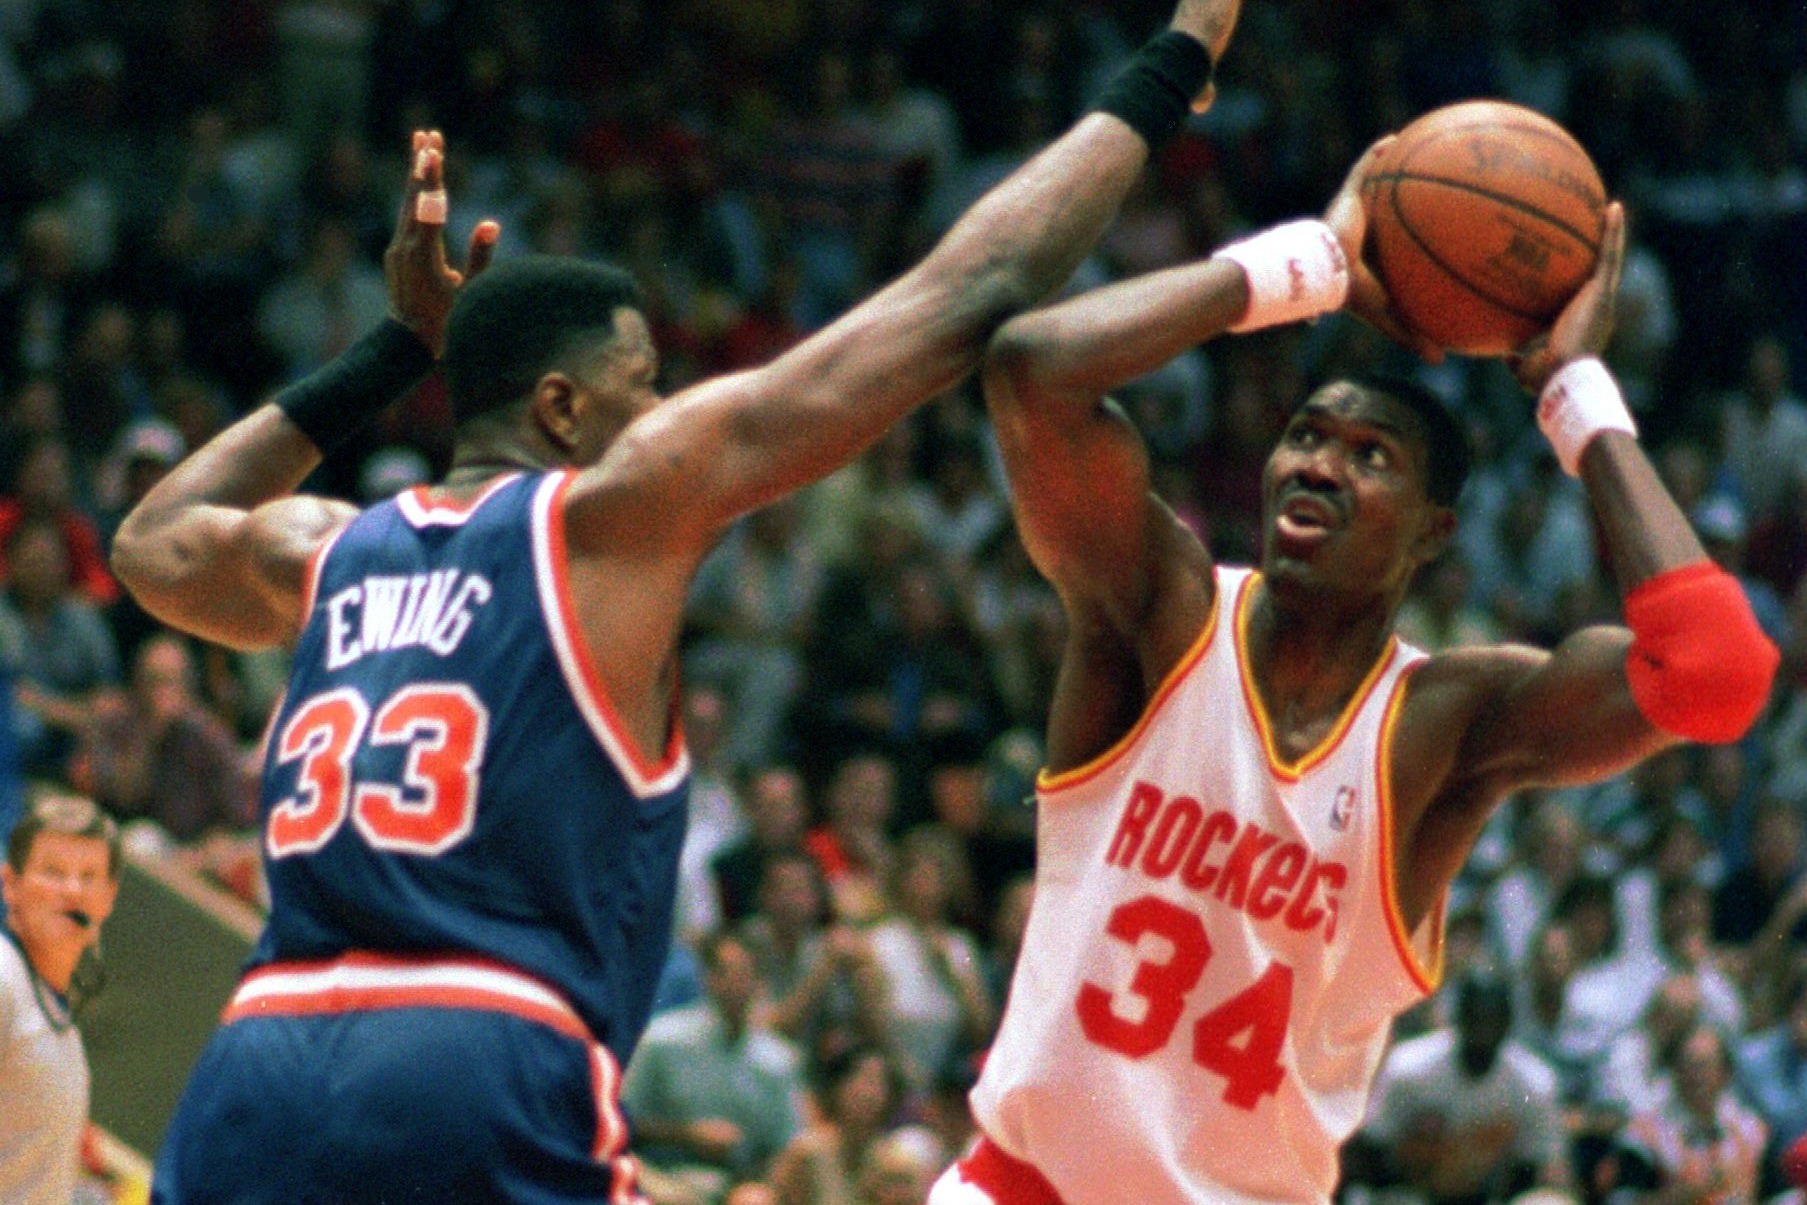 Ranking the Top 5 Coolest Jerseys in Houston Rockets History